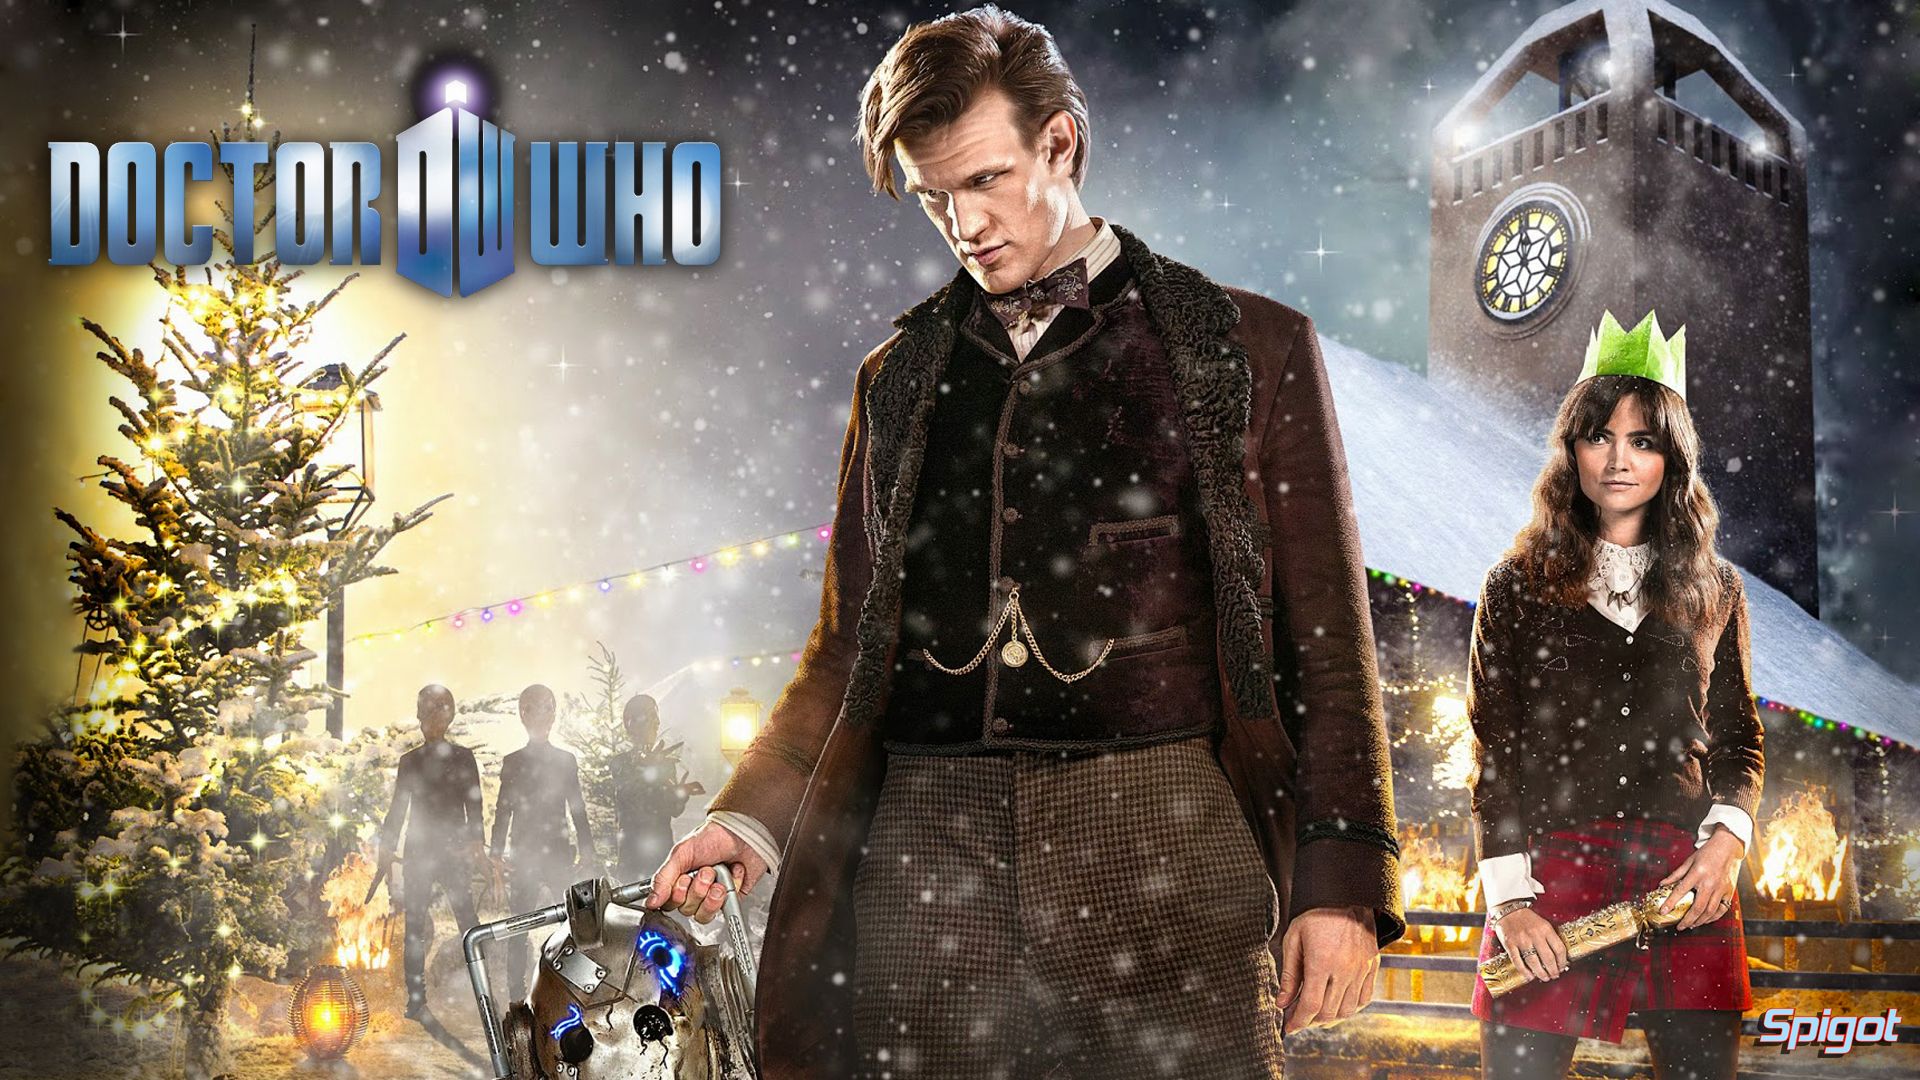 Doctor Who christmas special | George Spigot's Blog